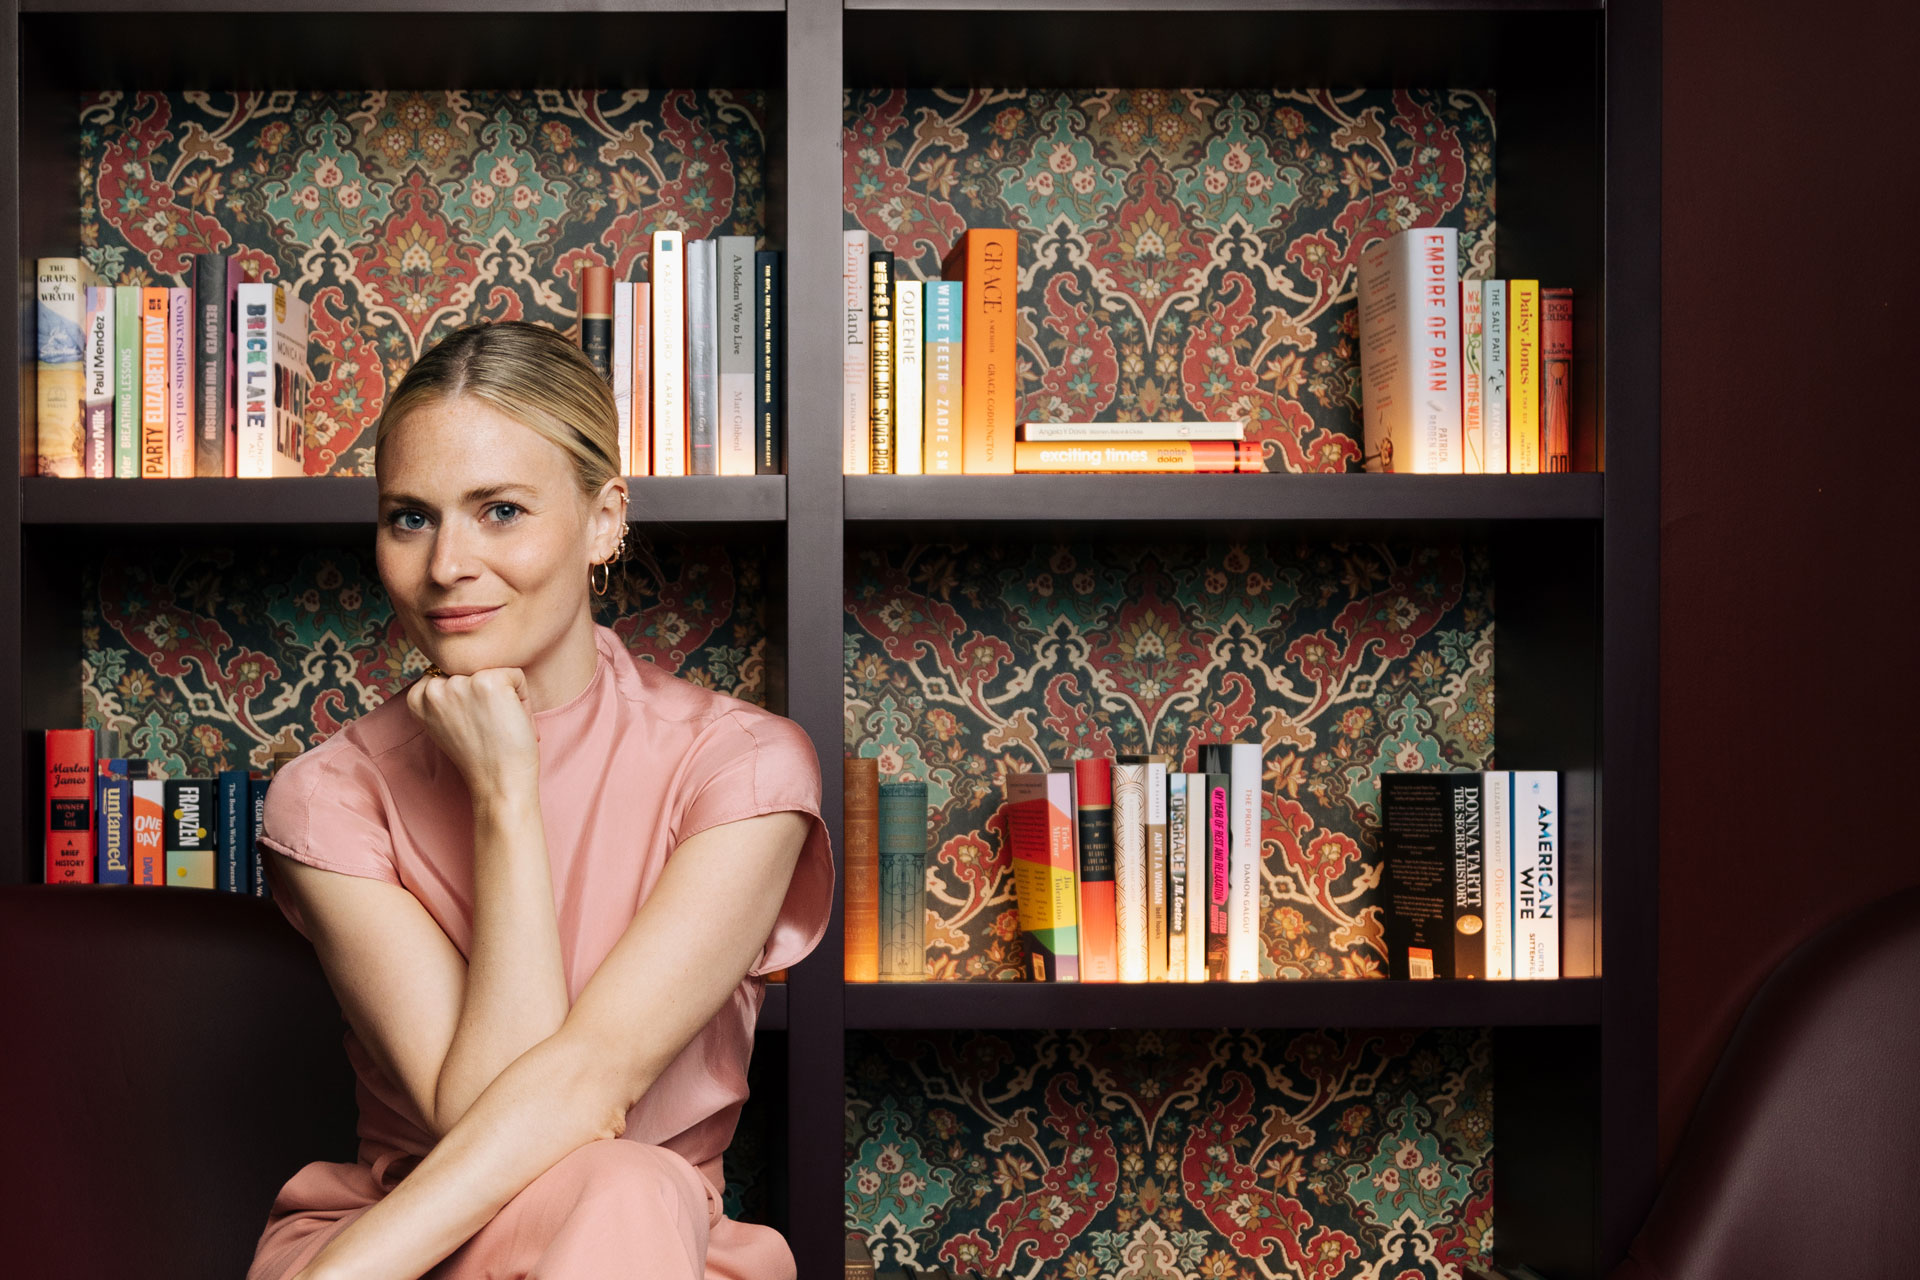 Pandora Sykes curates the library at The Other House